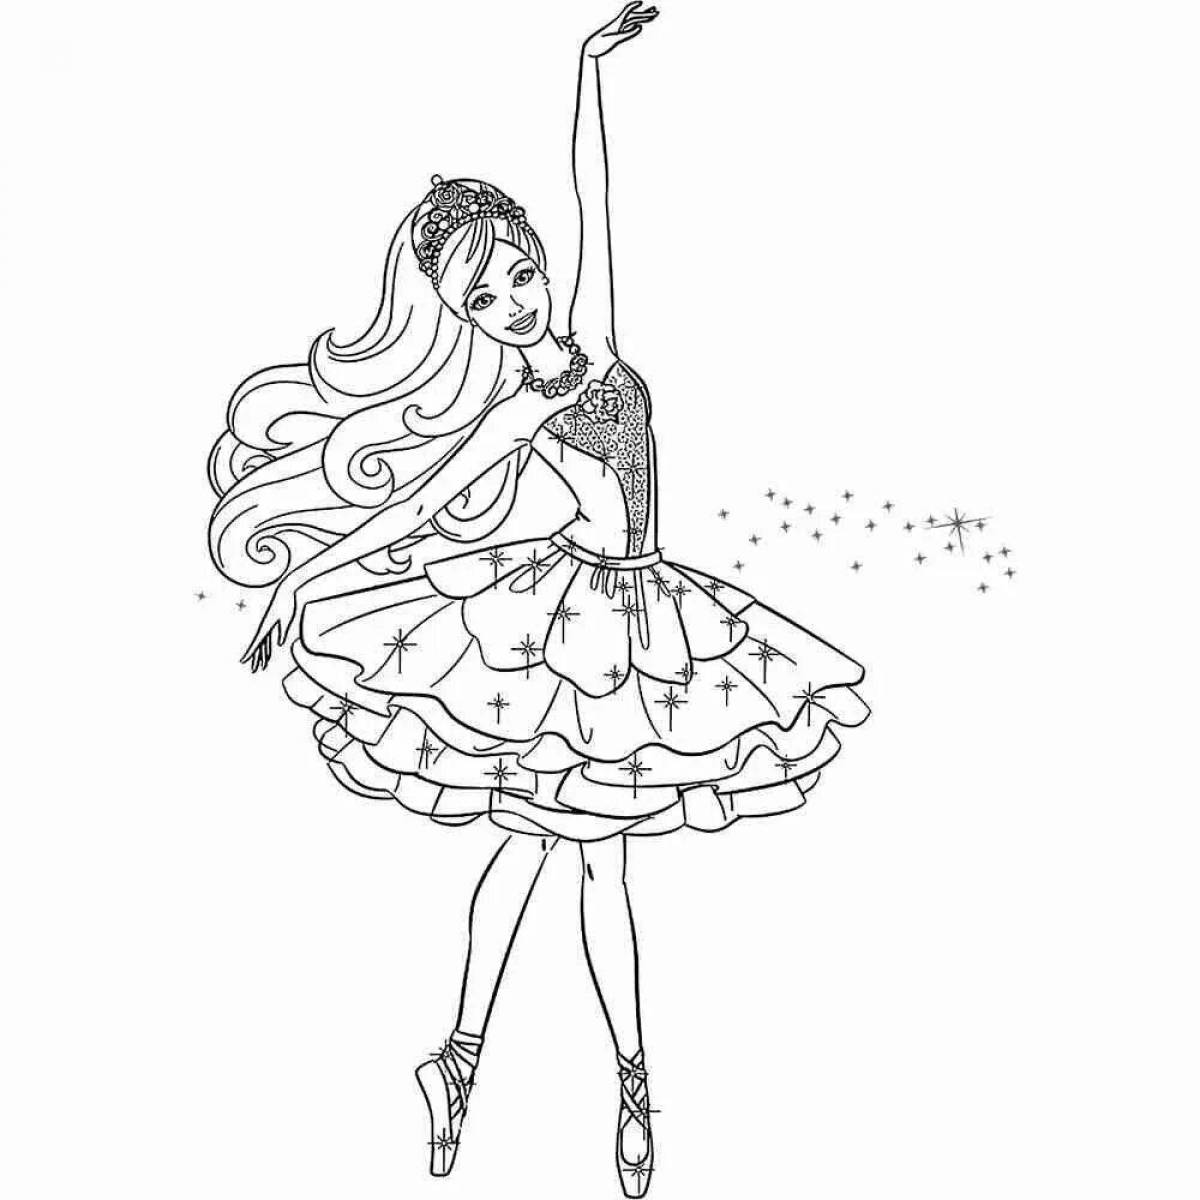 Dynamic dancer coloring page